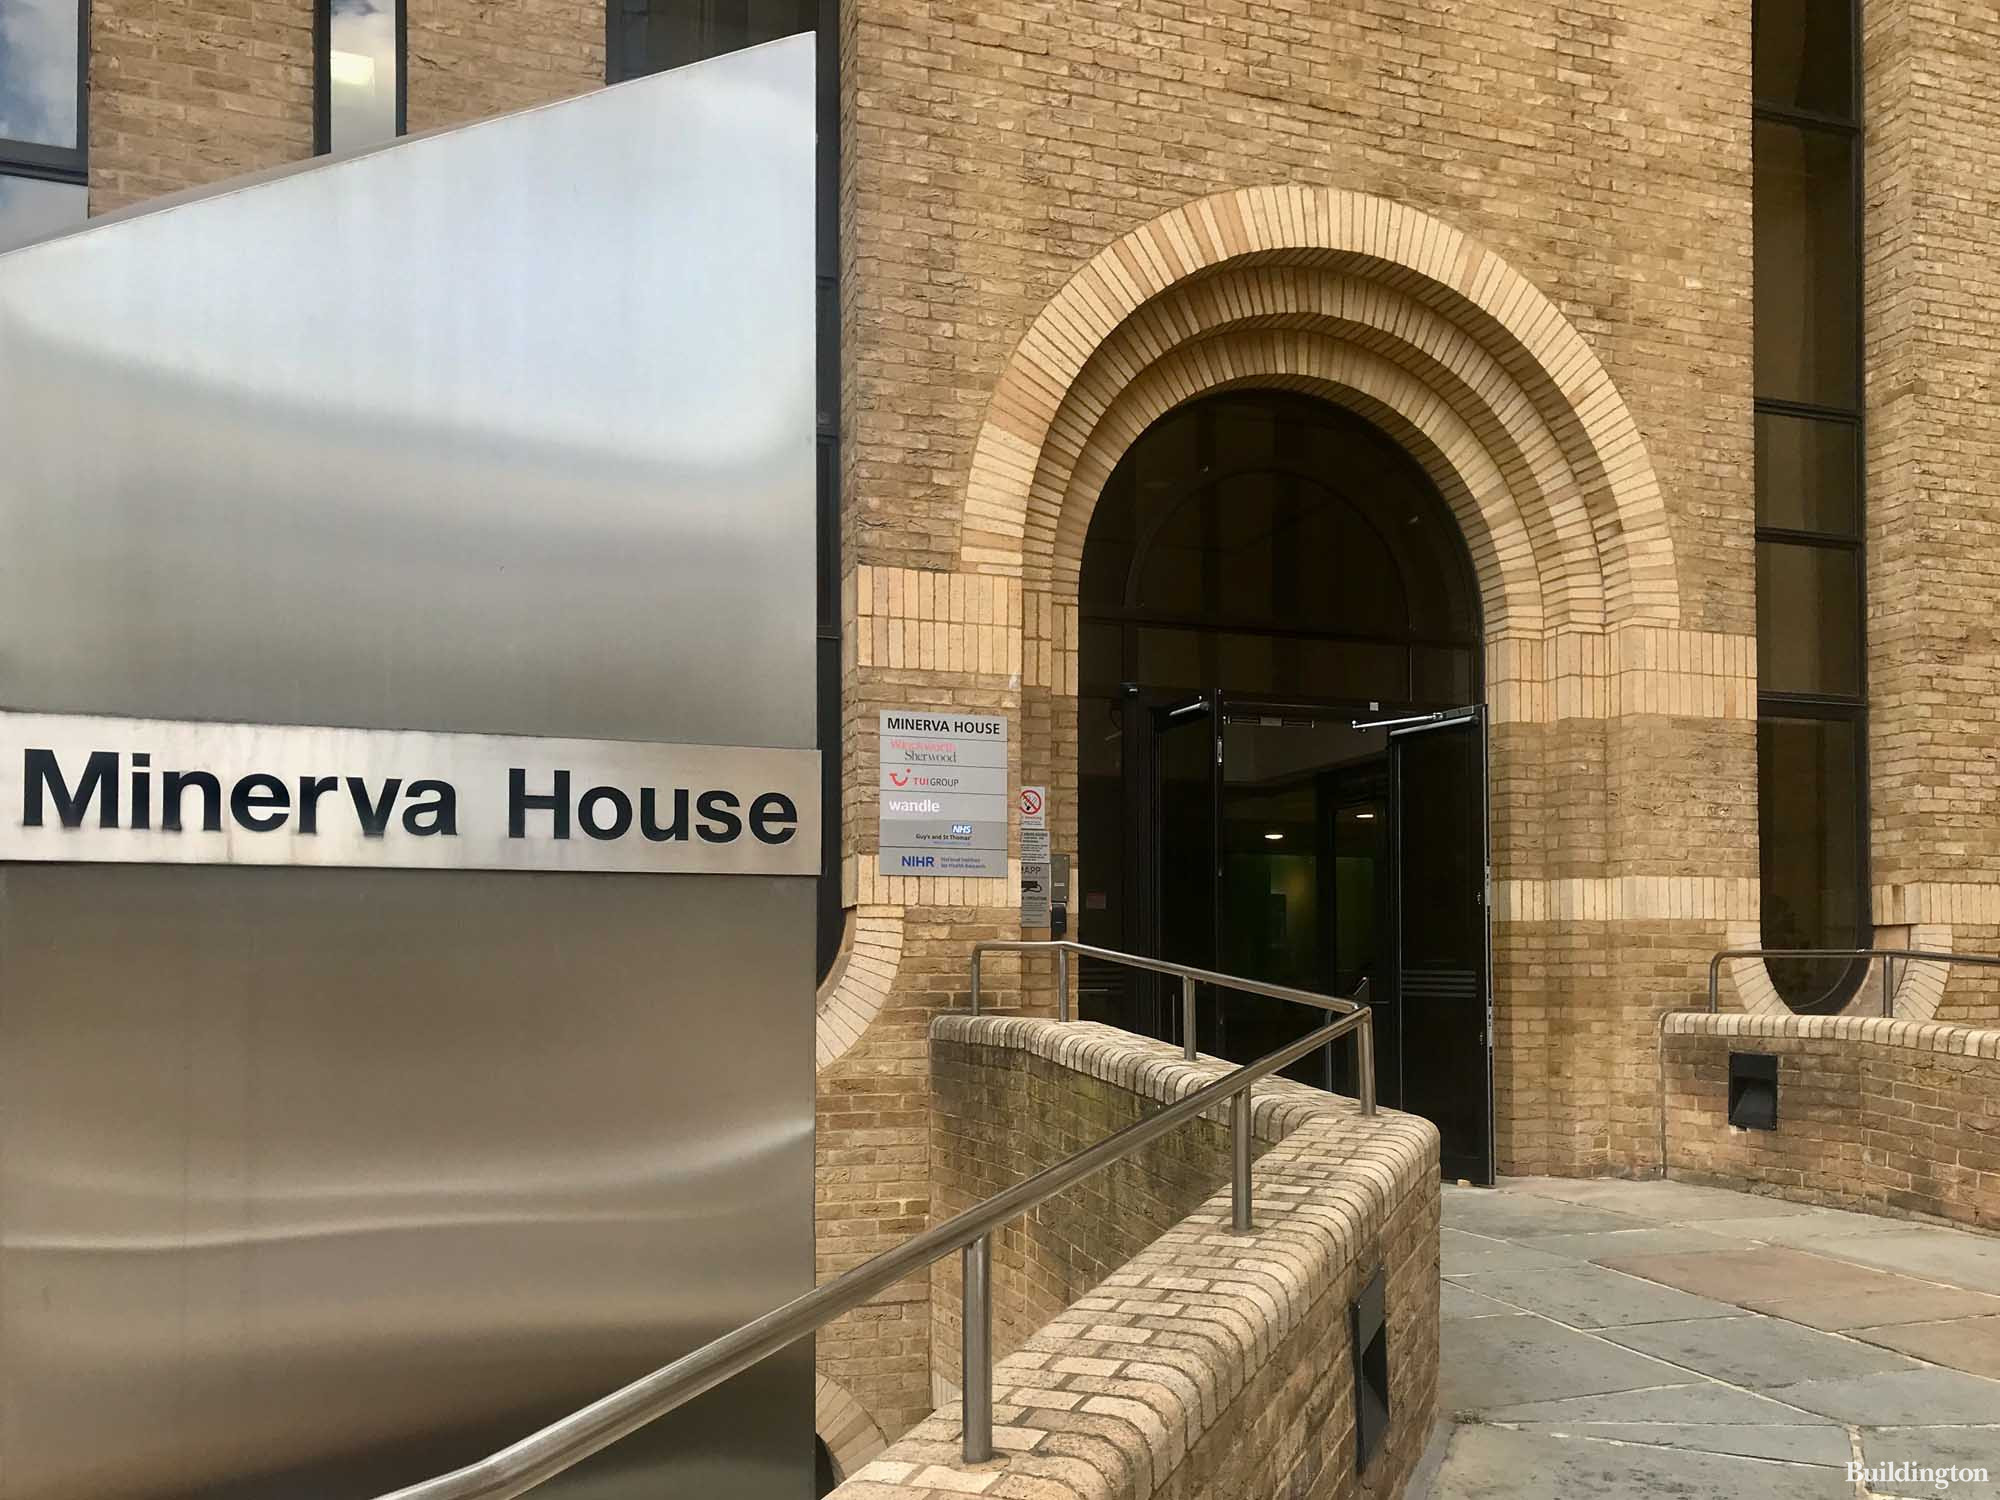 The main entrance to Minerva House at Montague Close in London SE1.